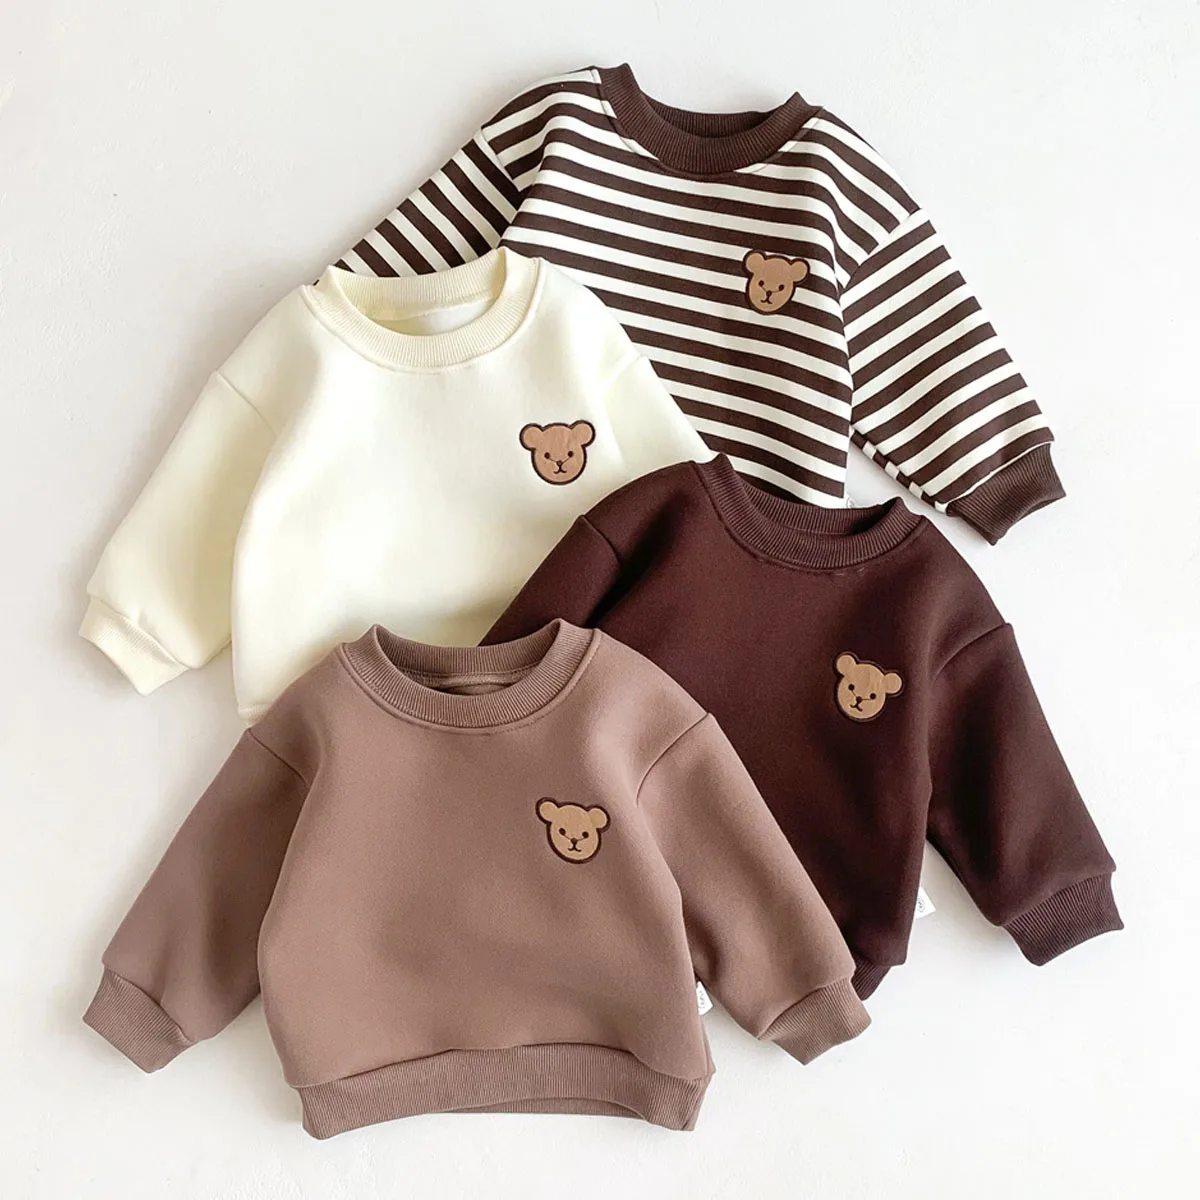 Thicken Sweatshirt Autumn Winter Baby Boys Clothing Cute Hoodies Pullovers Warm Long Sleeves Kids Tops Infant Outerwear Clothes